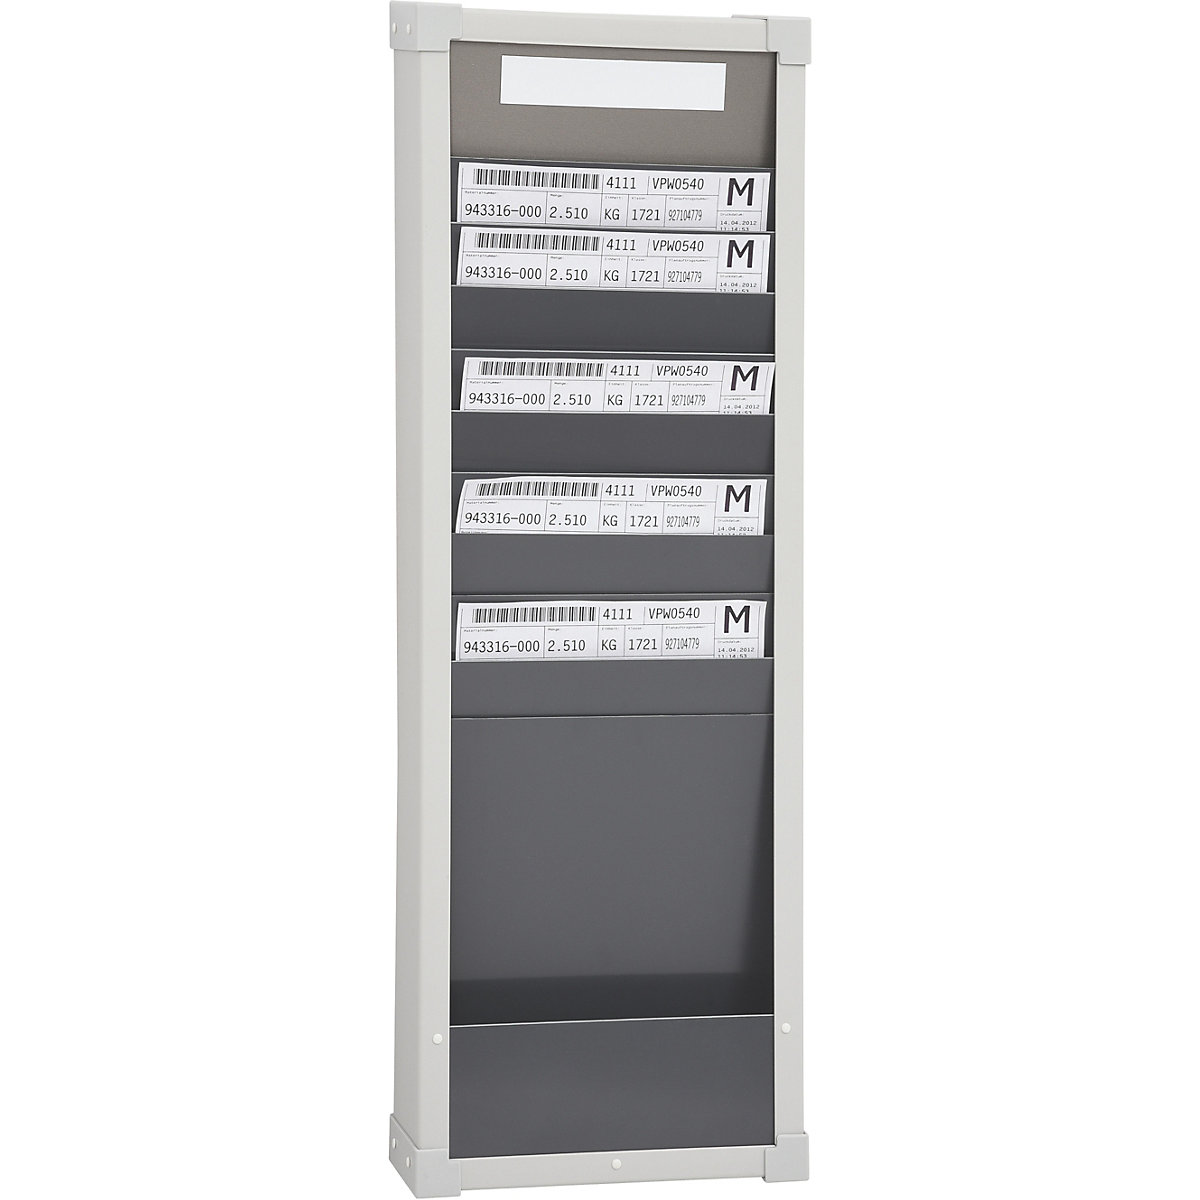 Card sorting board system – EICHNER, 10 compartments, height 750 mm, with 1 row-10